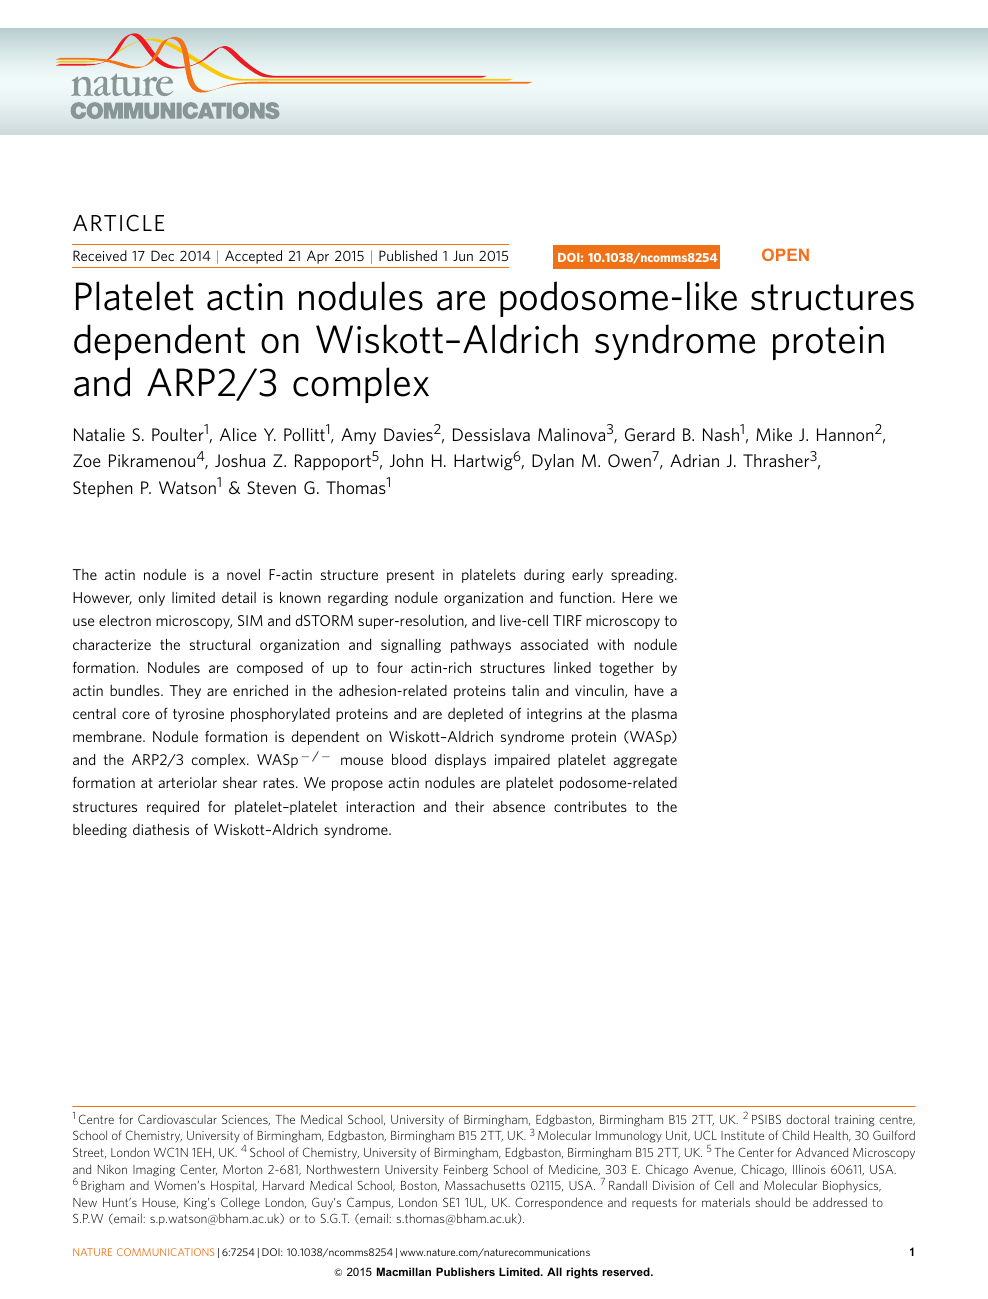 Platelet Actin Nodules Are Podosome Like Structures Dependent On Wiskott Aldrich Syndrome Protein And Arp2 3 Complex Topic Of Research Paper In Biological Sciences Download Scholarly Article Pdf And Read For Free On Cyberleninka